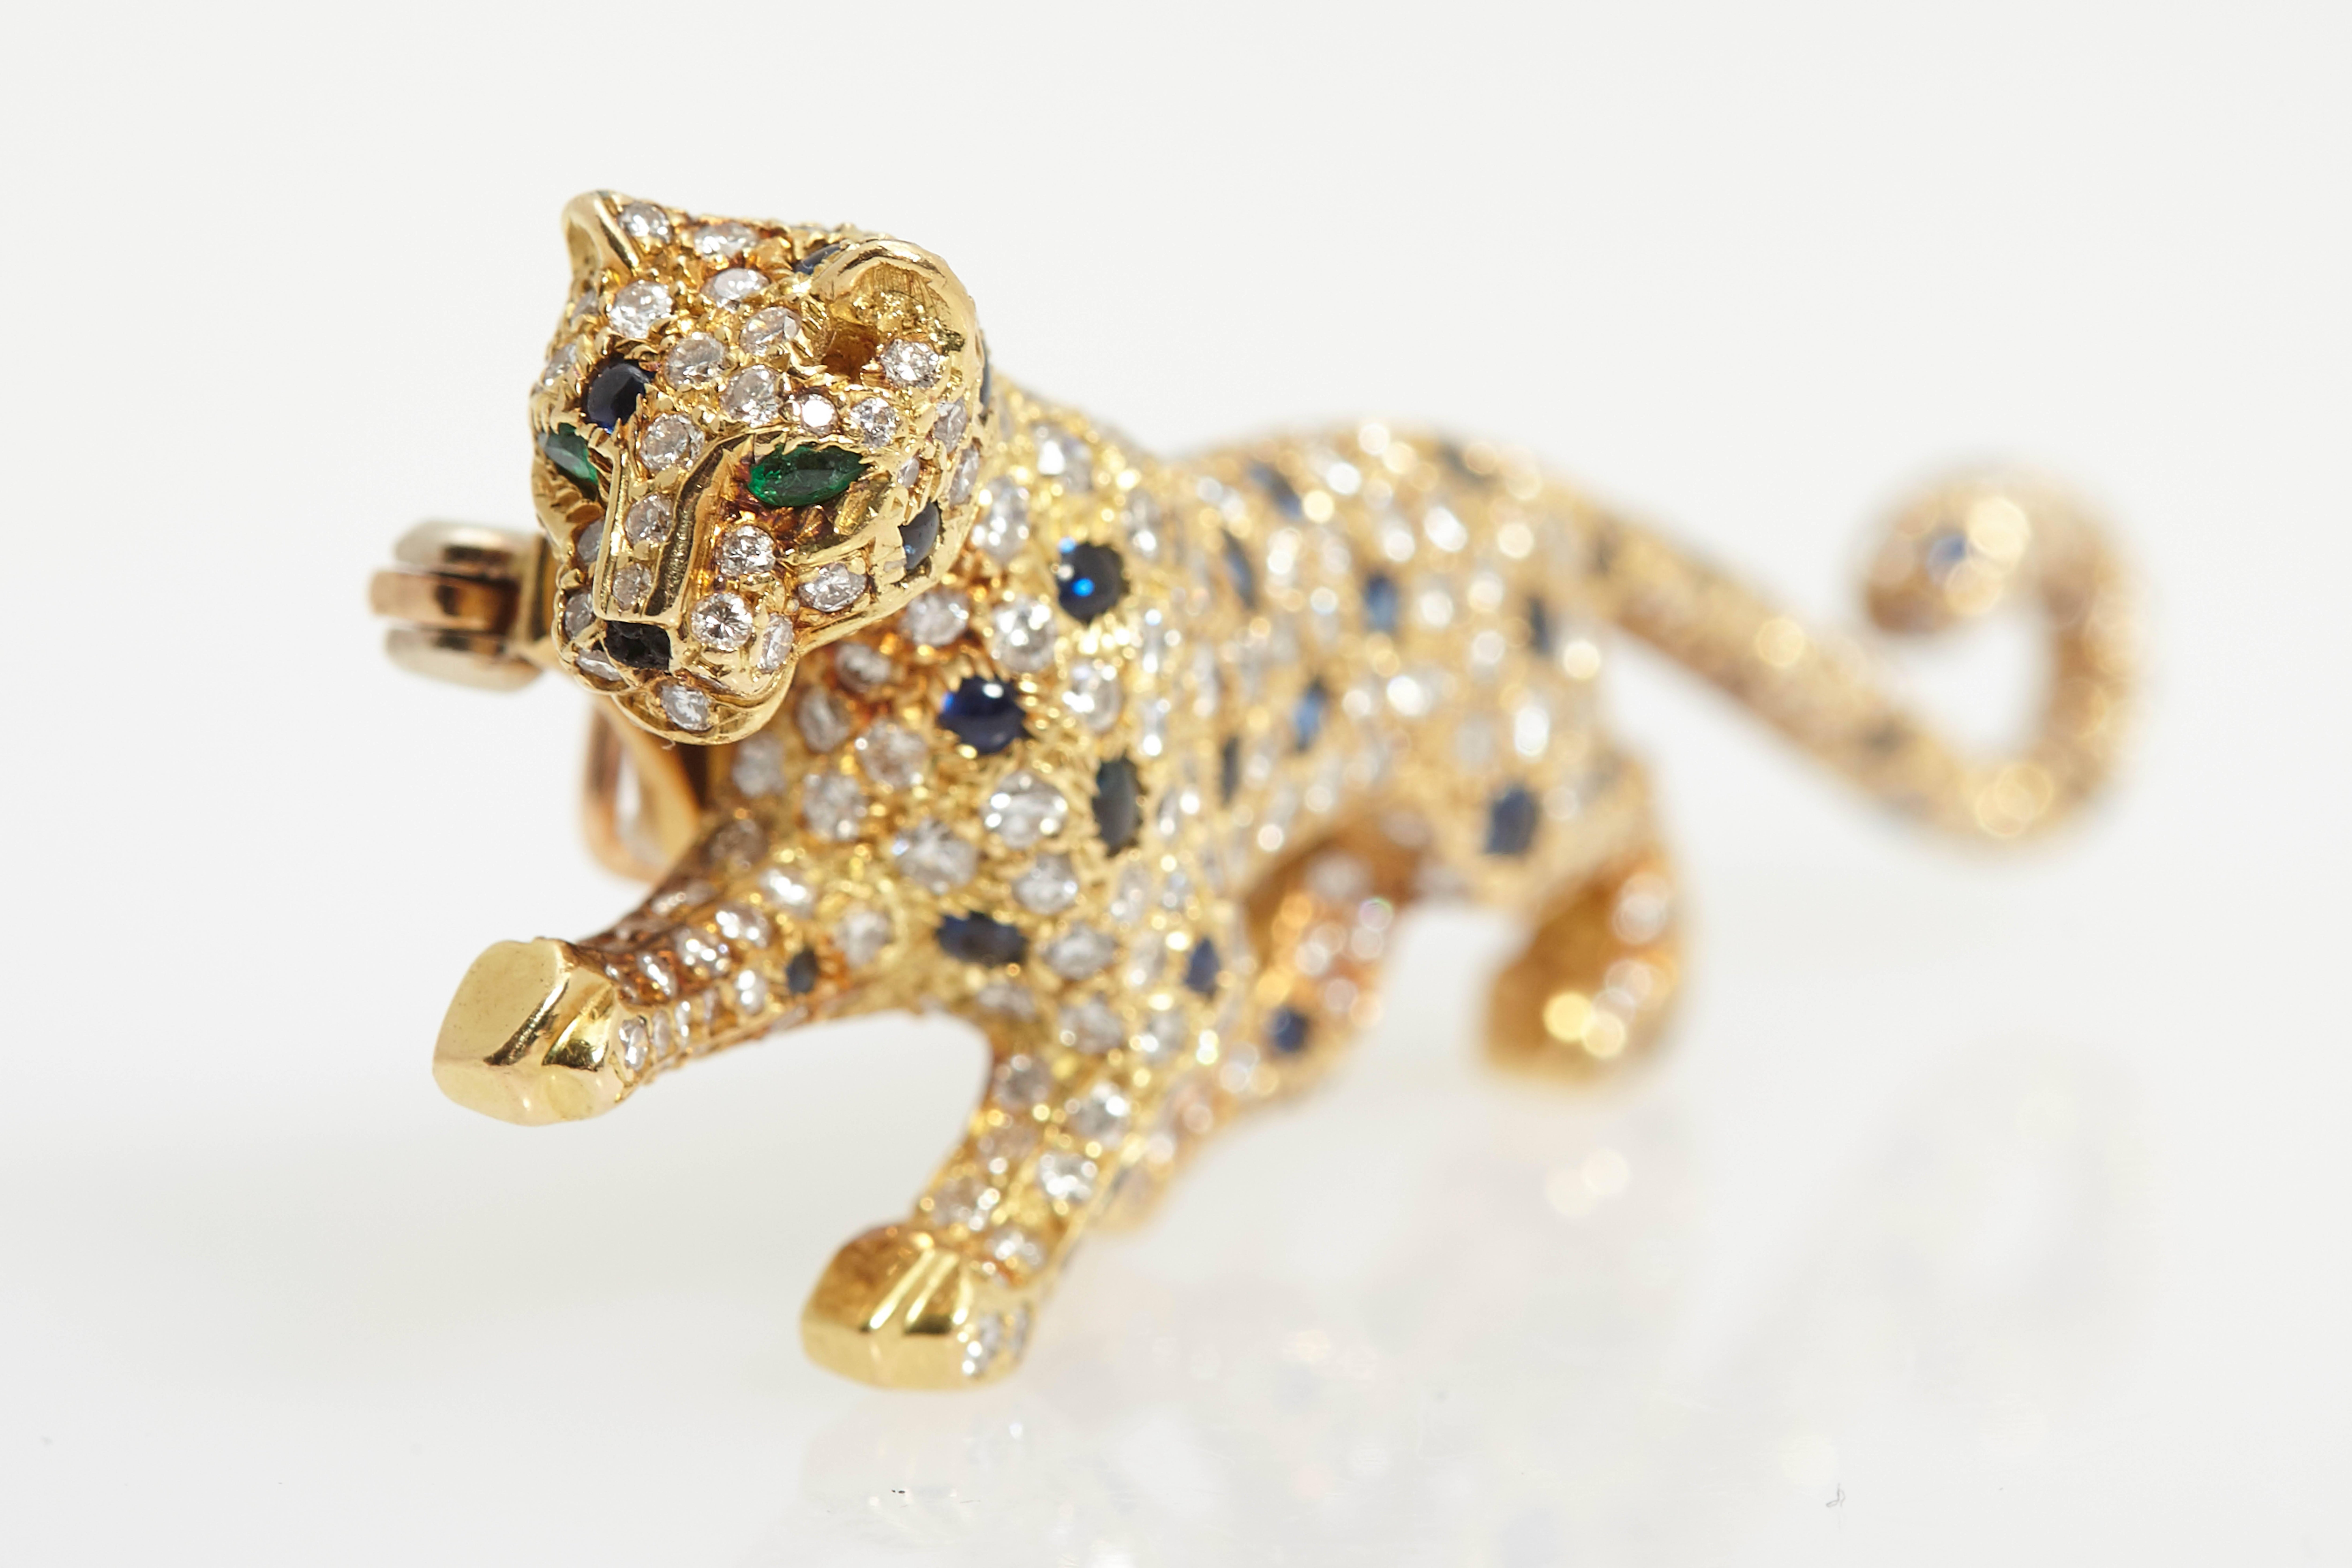 An Iconic and Rare Cartier Pantheré Brooch in Yellow Gold, Diamonds and Blue Sapphires, with Emerald Eyes. Mounted on 18kt yellow gold. Made in France, circa 1990. 